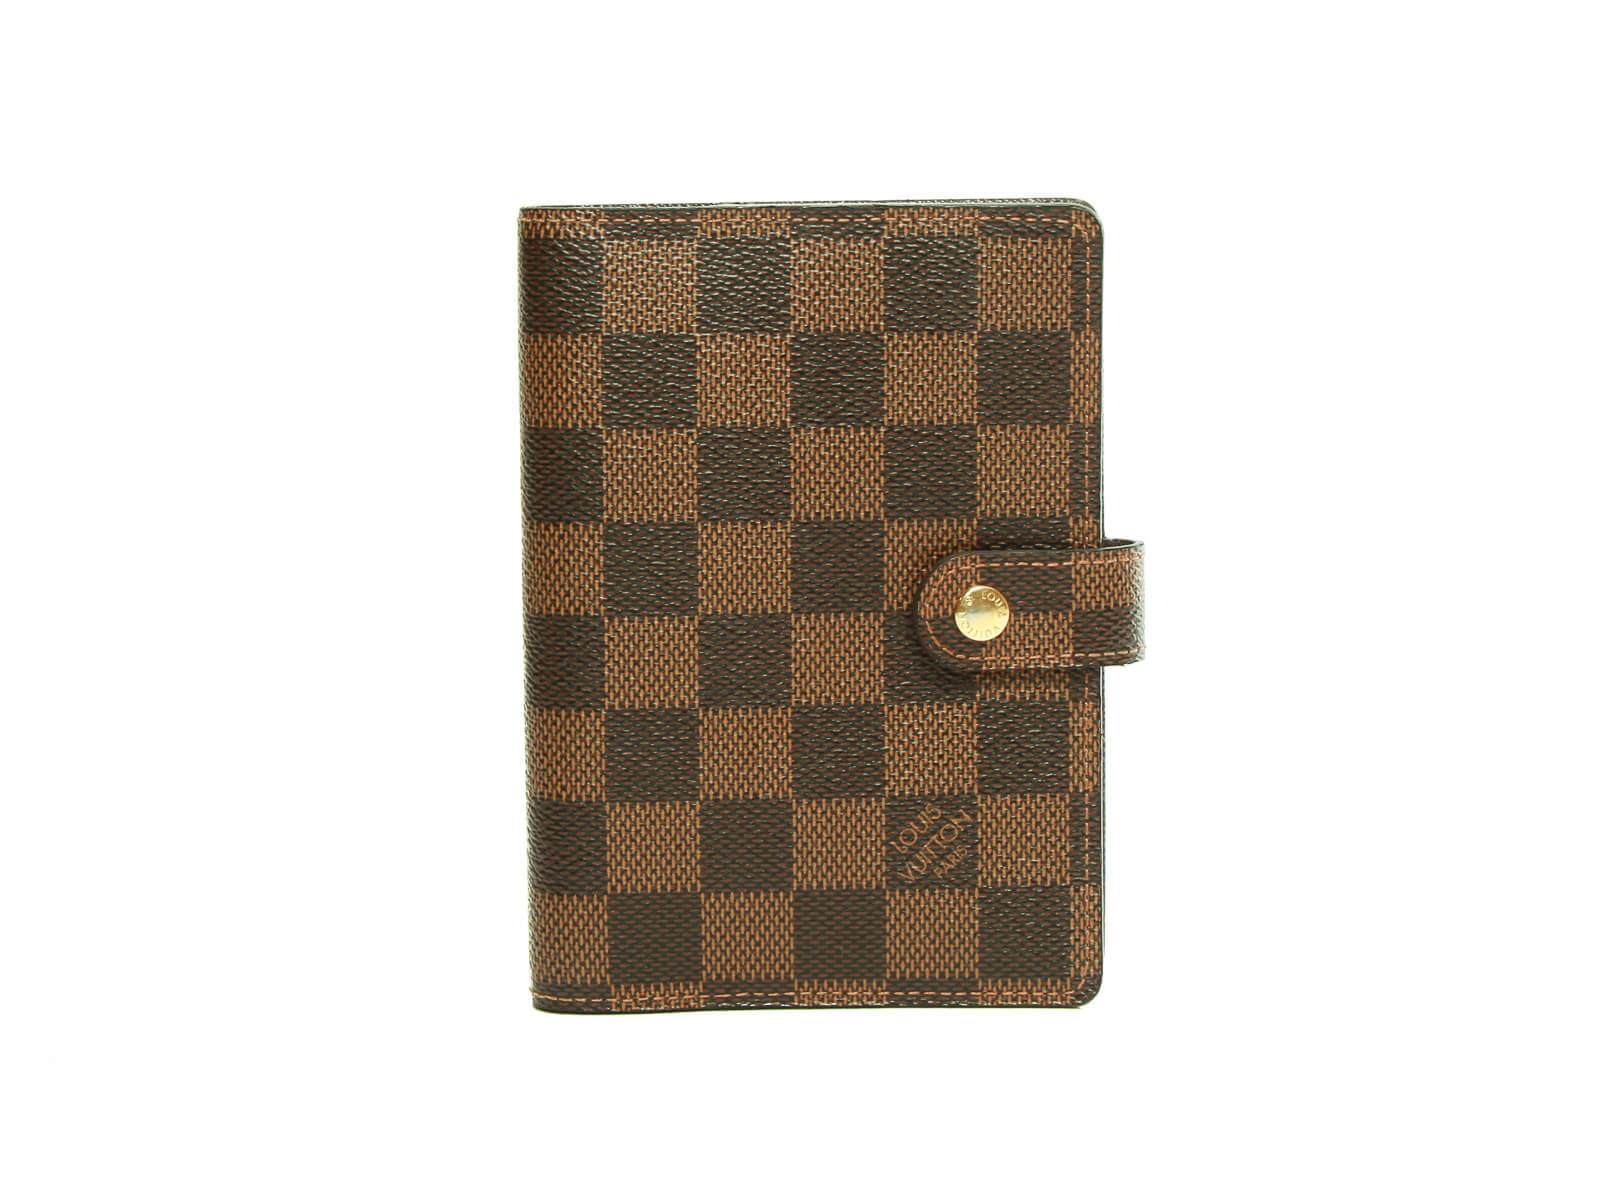 LOUIS VUITTON Damier Ebene Compact Wallet - Preowned luxury